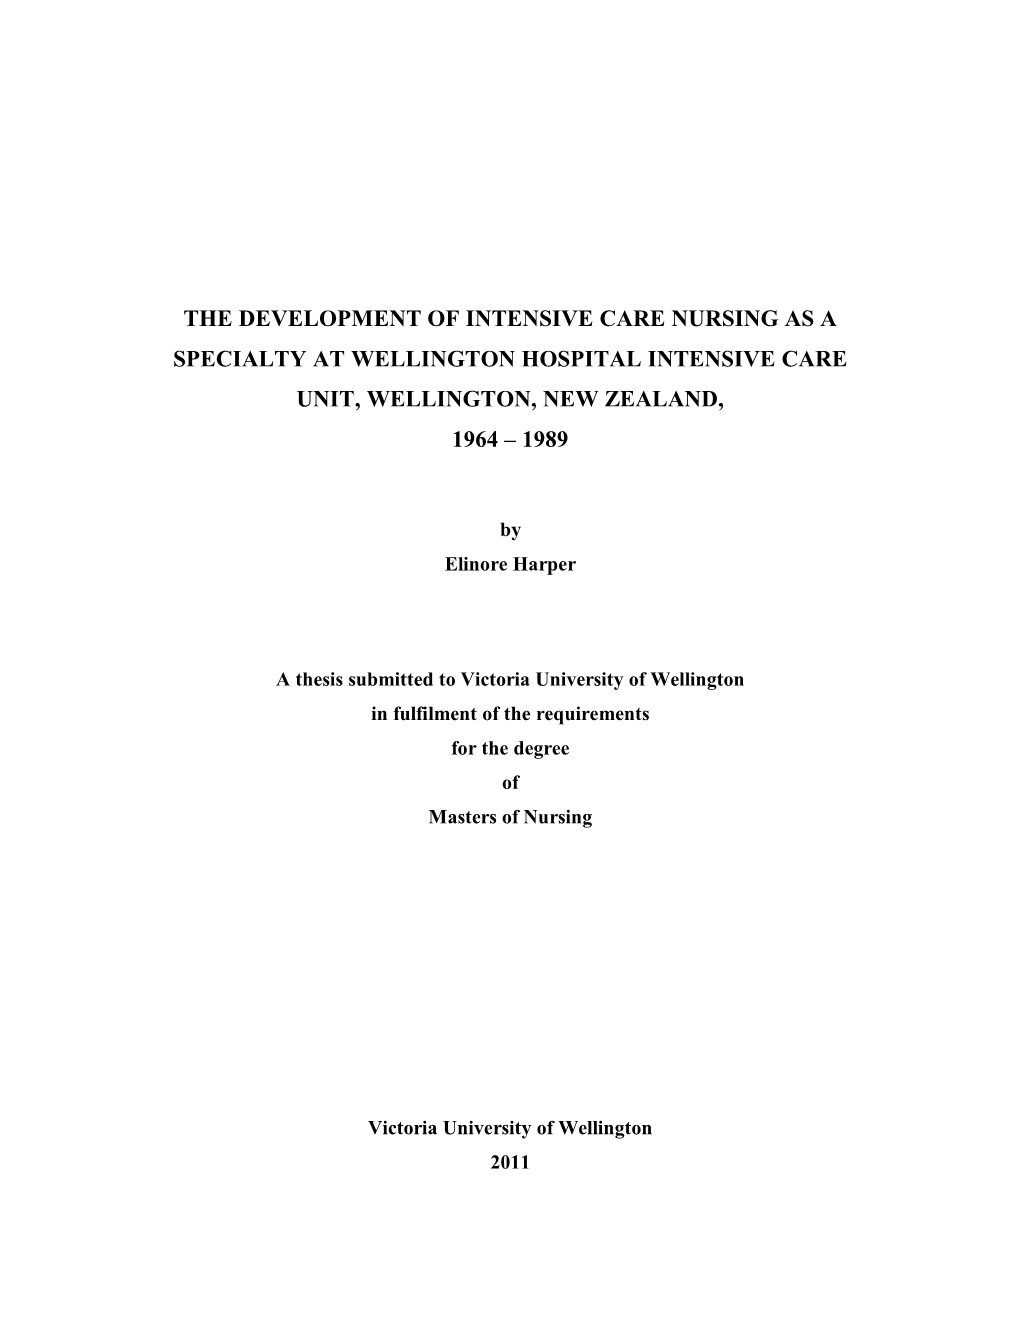 The Development of Intensive Care Nursing As a Specialty at Wellington Hospital Intensive Care Unit, Wellington, New Zealand, 1964 – 1989